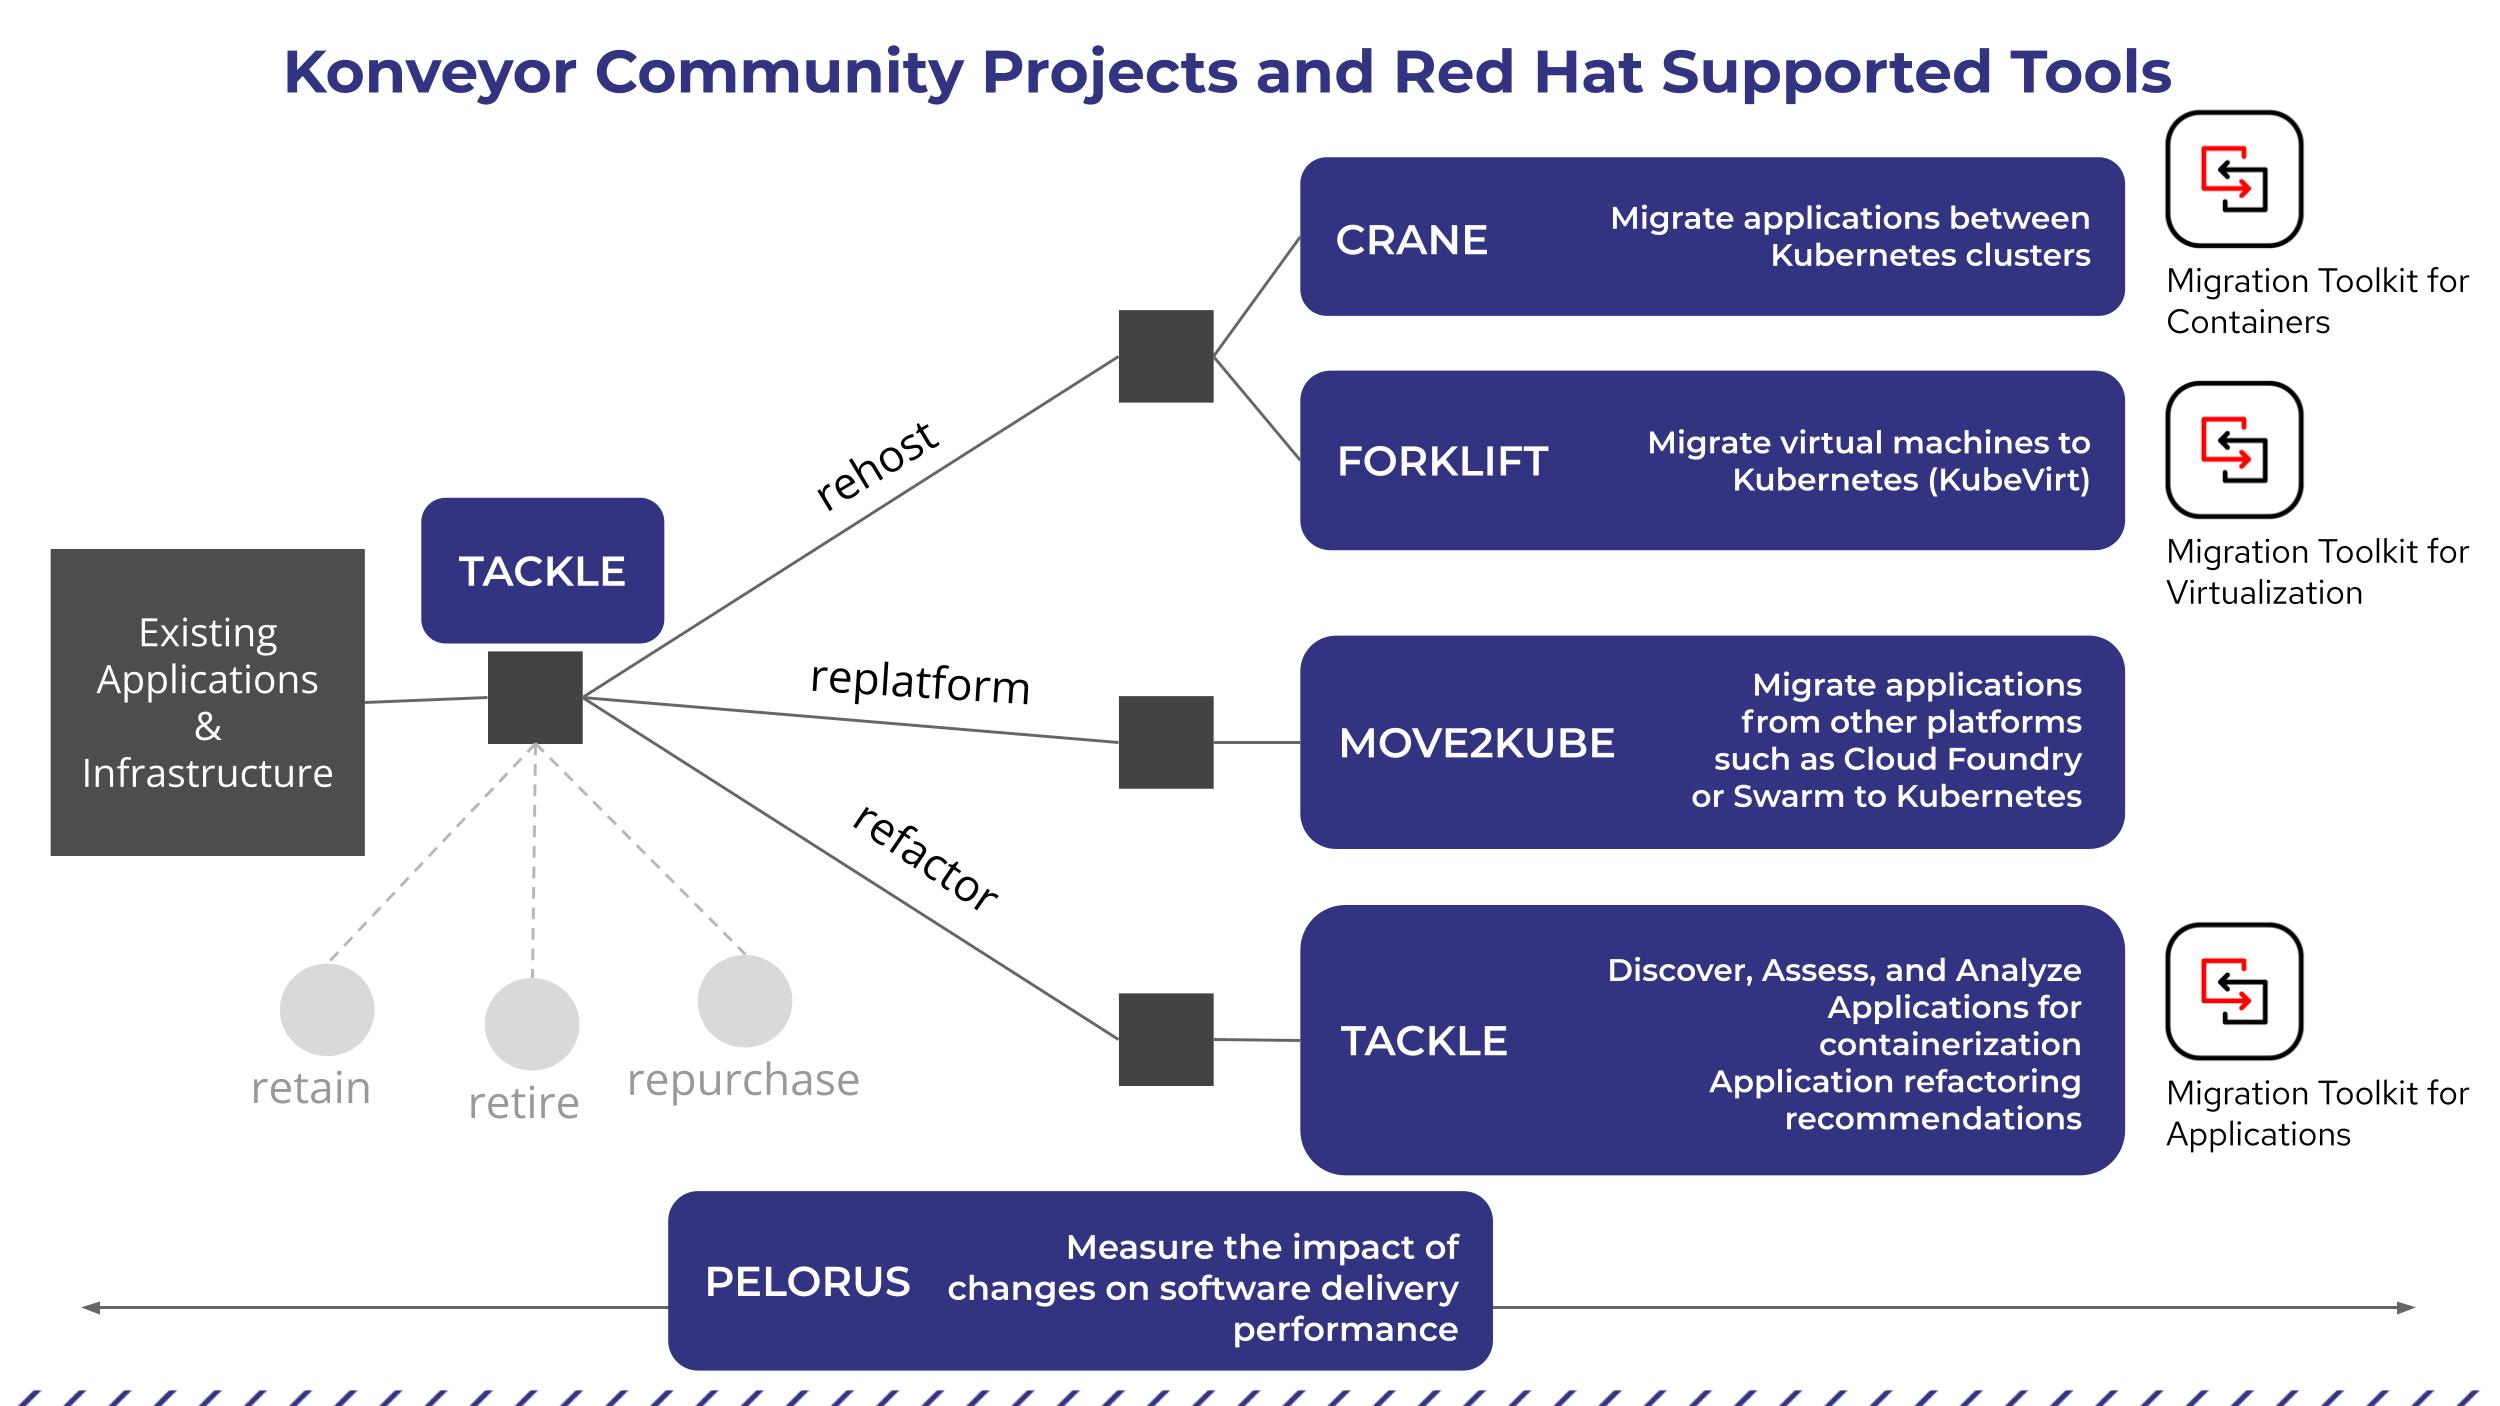 Konveyor Community Projects and Red Hat Supported Tools